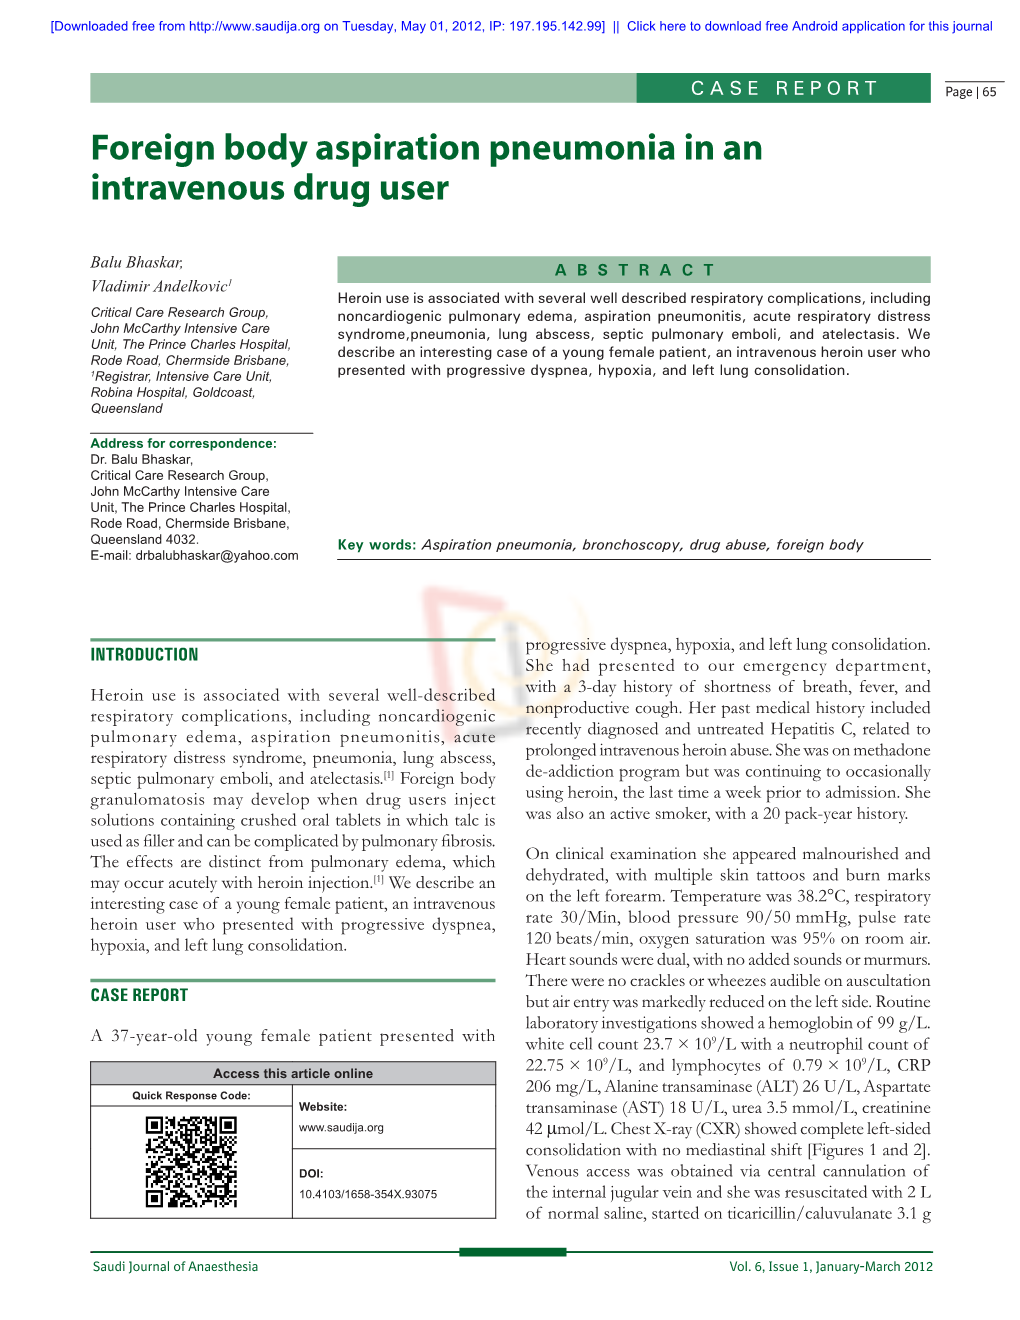 Foreign Body Aspiration Pneumonia in an Intravenous Drug User